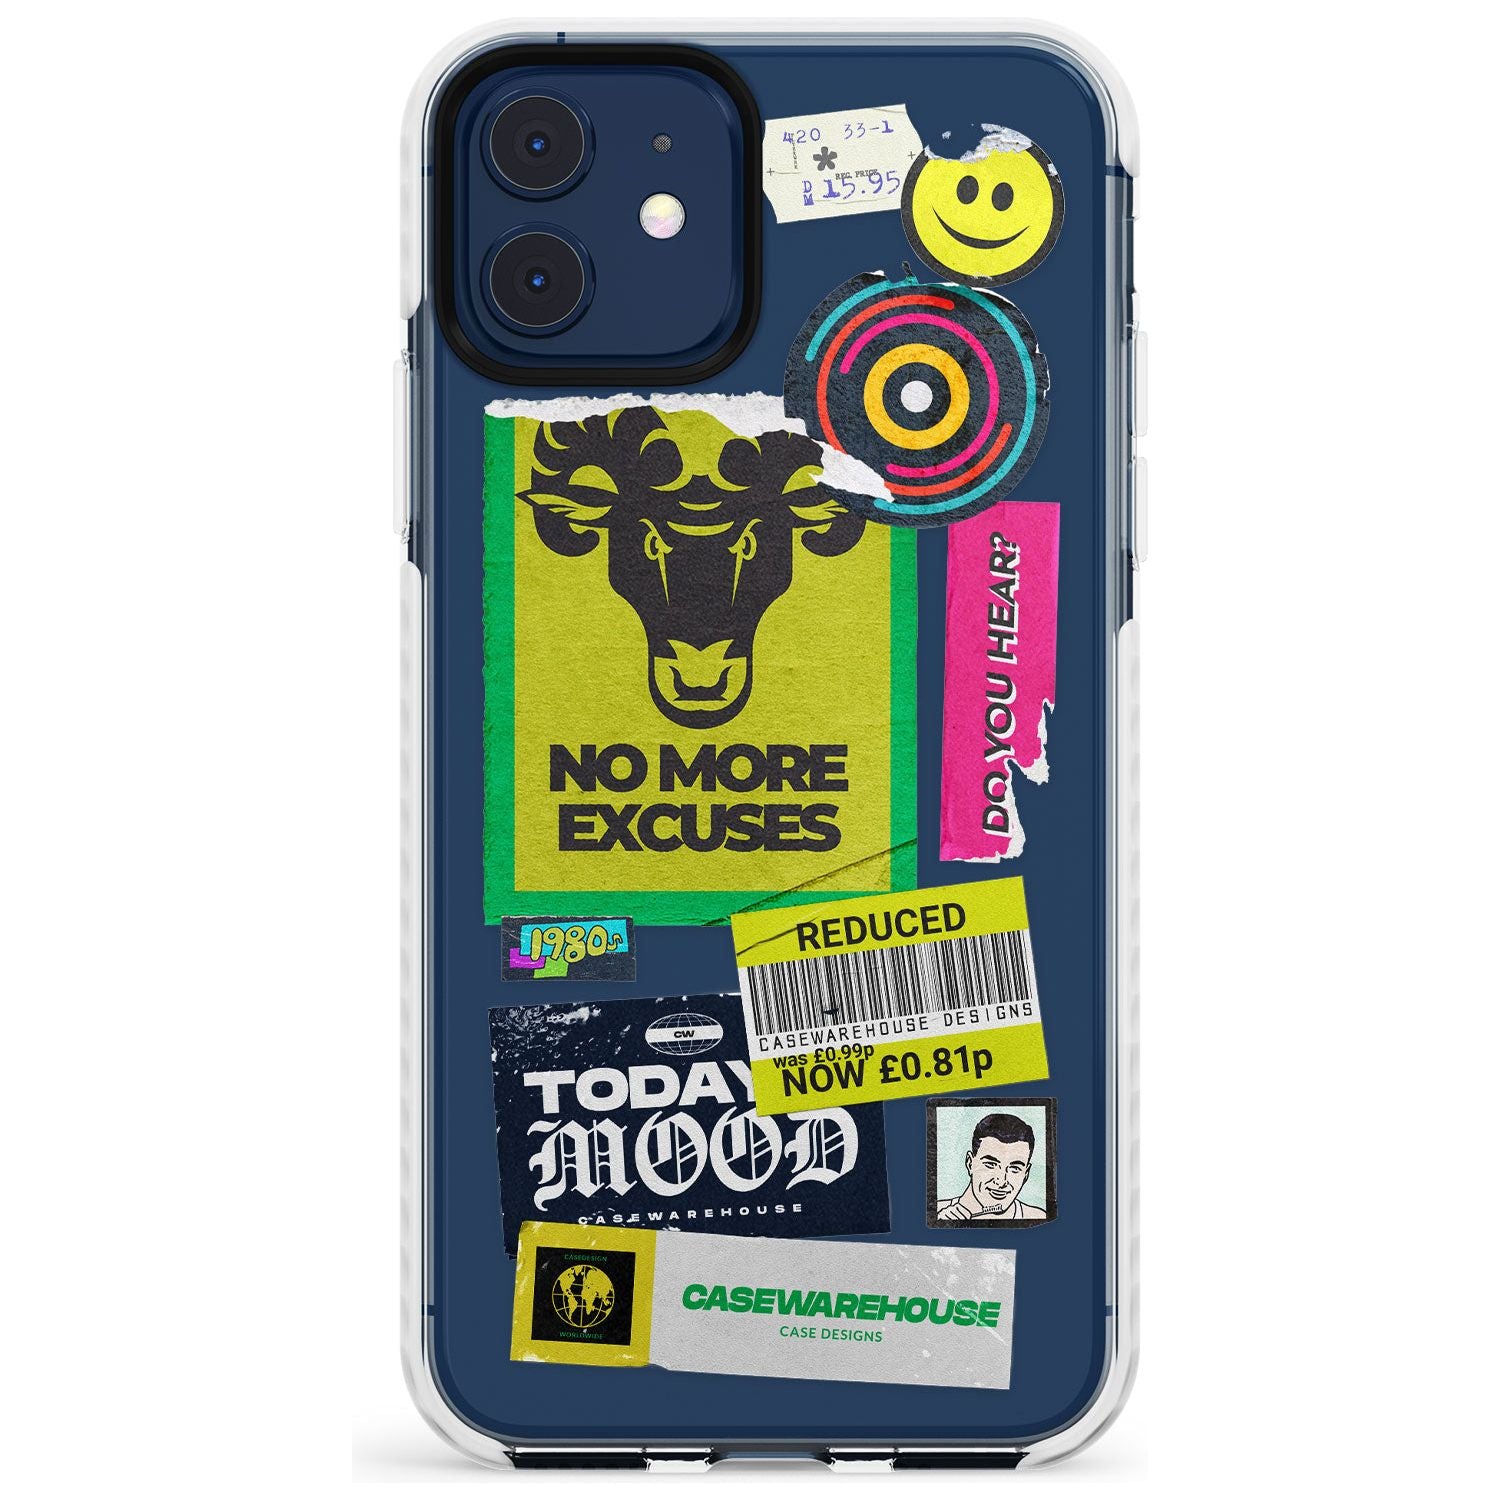 No More Excuses Sticker Mix Slim TPU Phone Case for iPhone 11